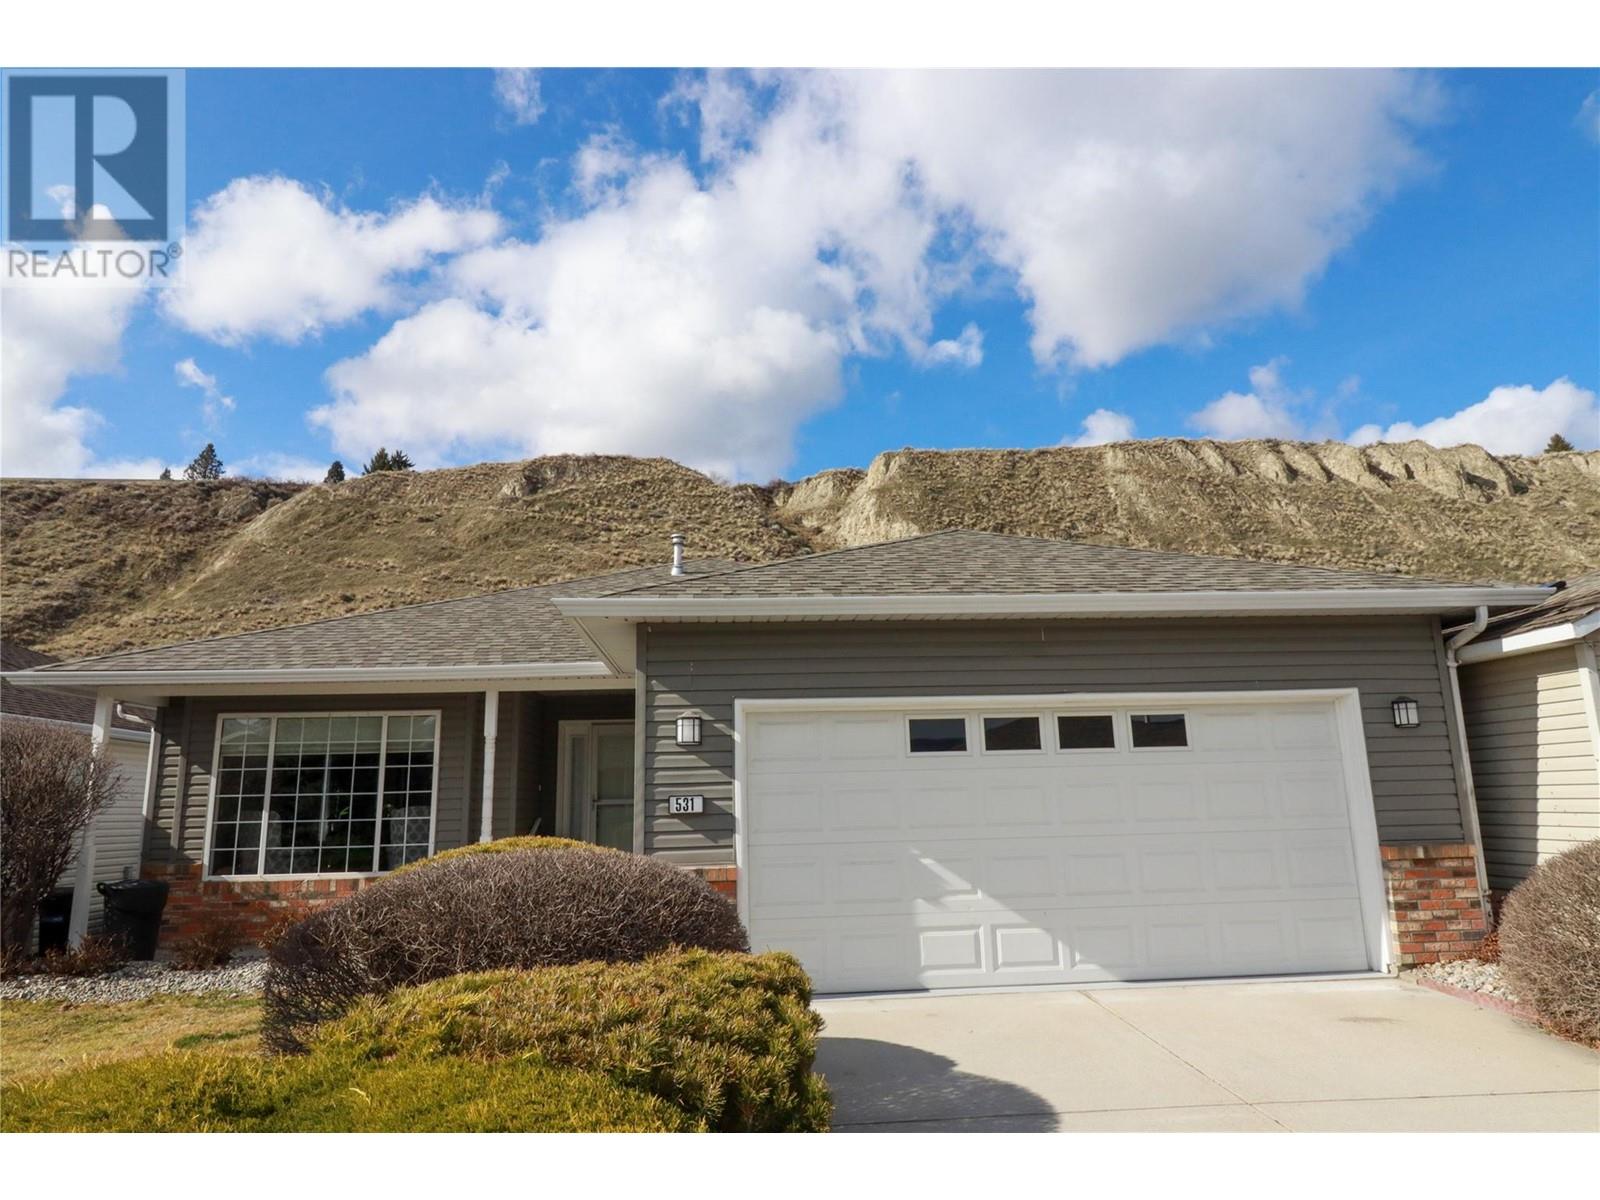 531 Red Wing Drive, Husula, Penticton 